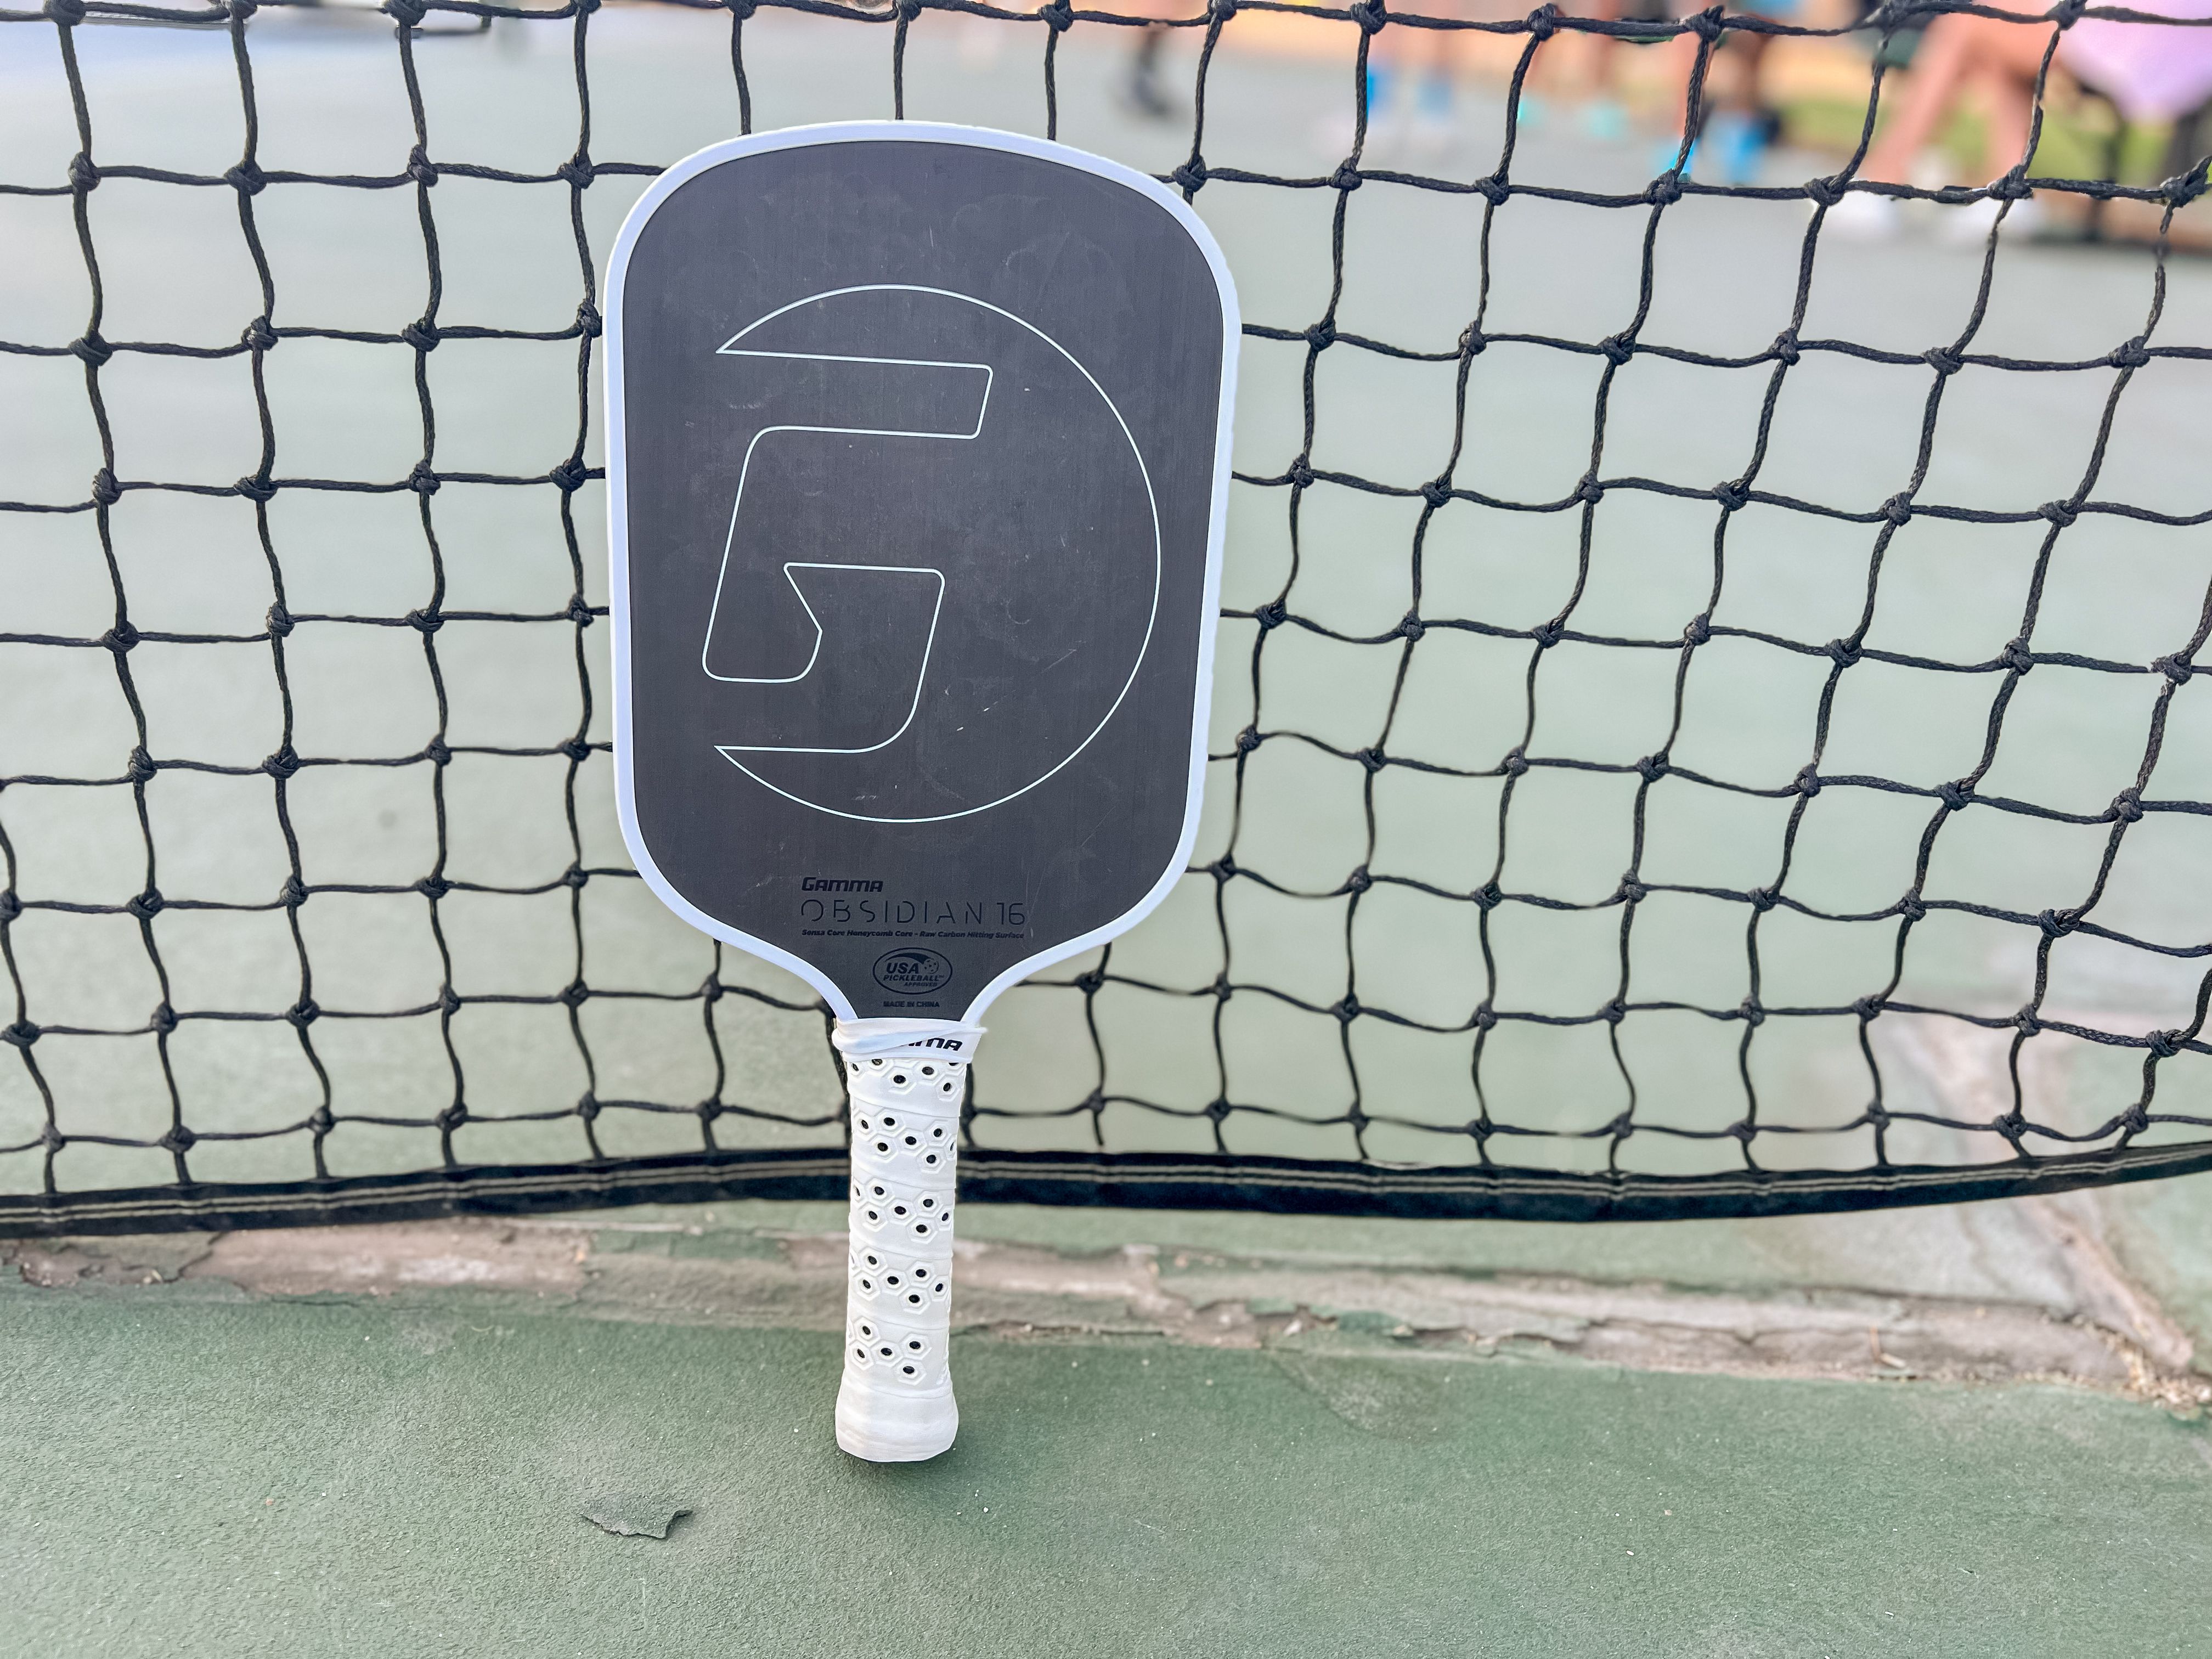 The GAMMA Obsidian pickleball paddle resting against a net